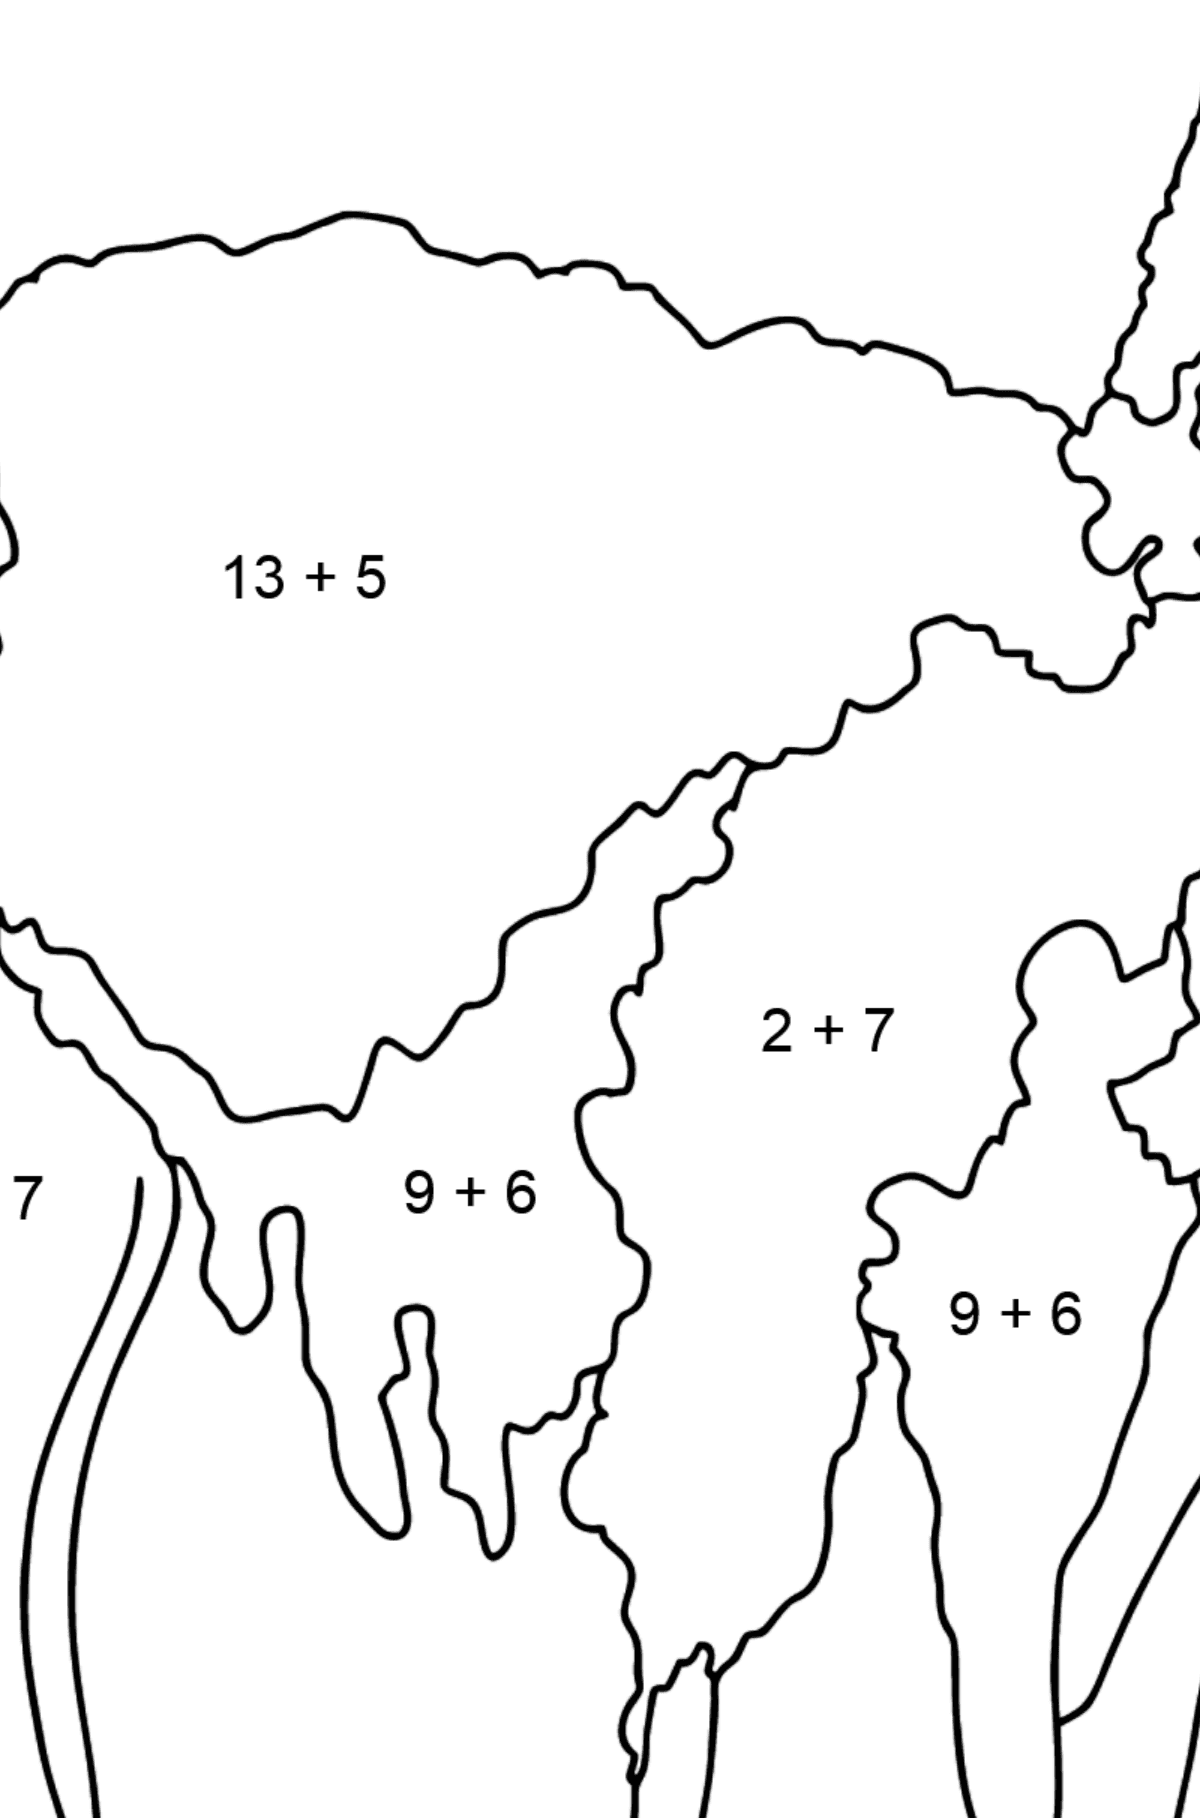 Coloring Page - A Lama is Looking Haughtily - Math Coloring - Addition for Kids